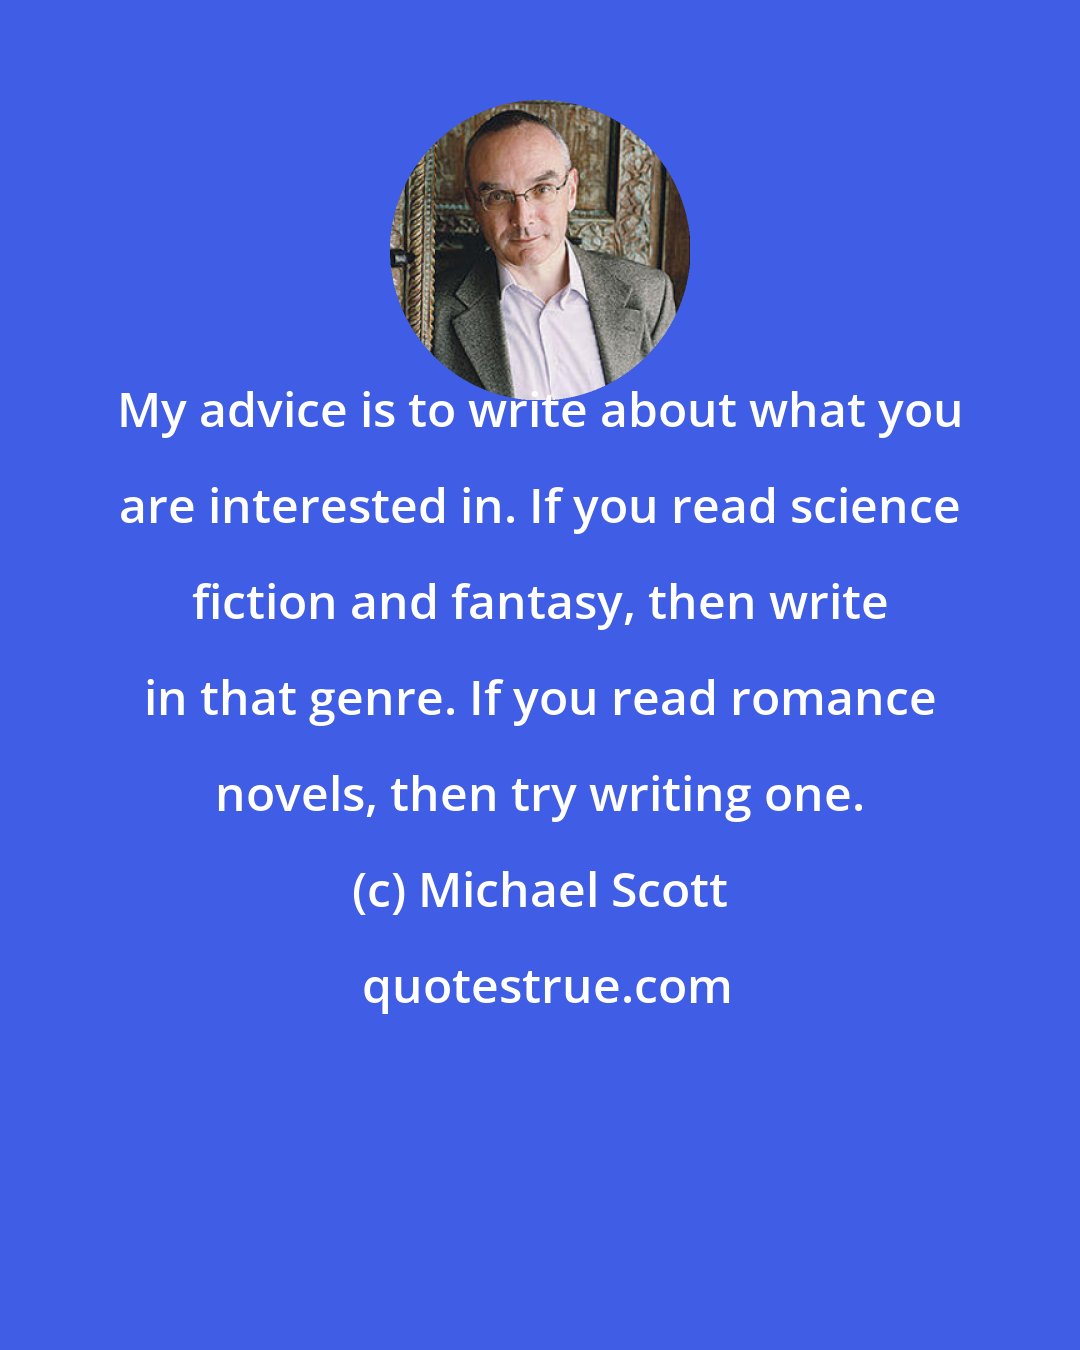 Michael Scott: My advice is to write about what you are interested in. If you read science fiction and fantasy, then write in that genre. If you read romance novels, then try writing one.